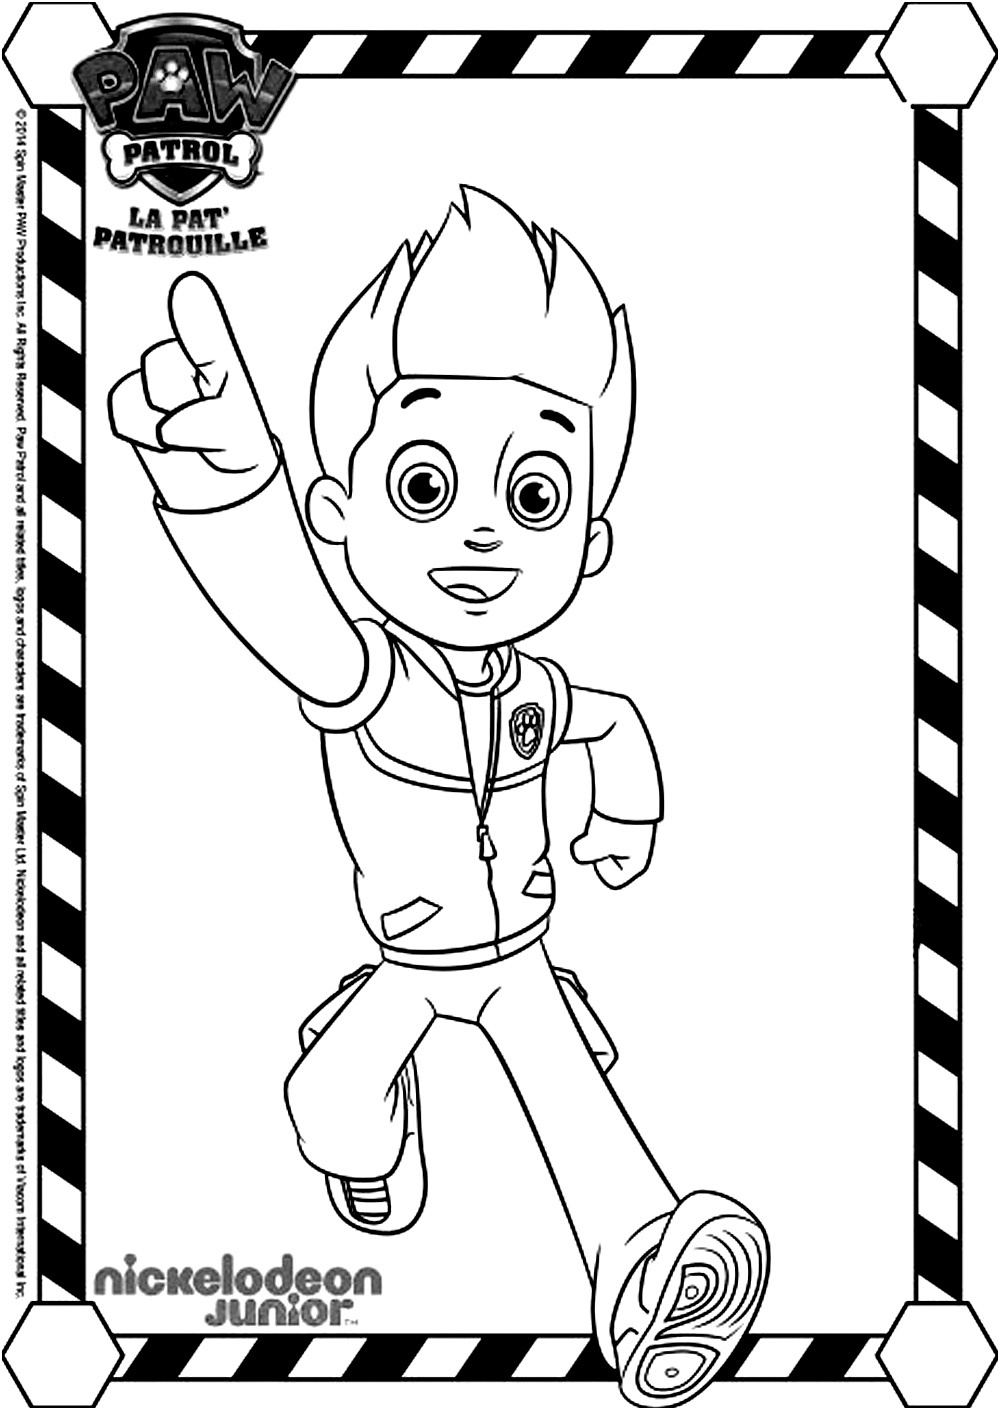 14 Propre Chase Pat Patrouille Coloriage Collection - COLORIAGE